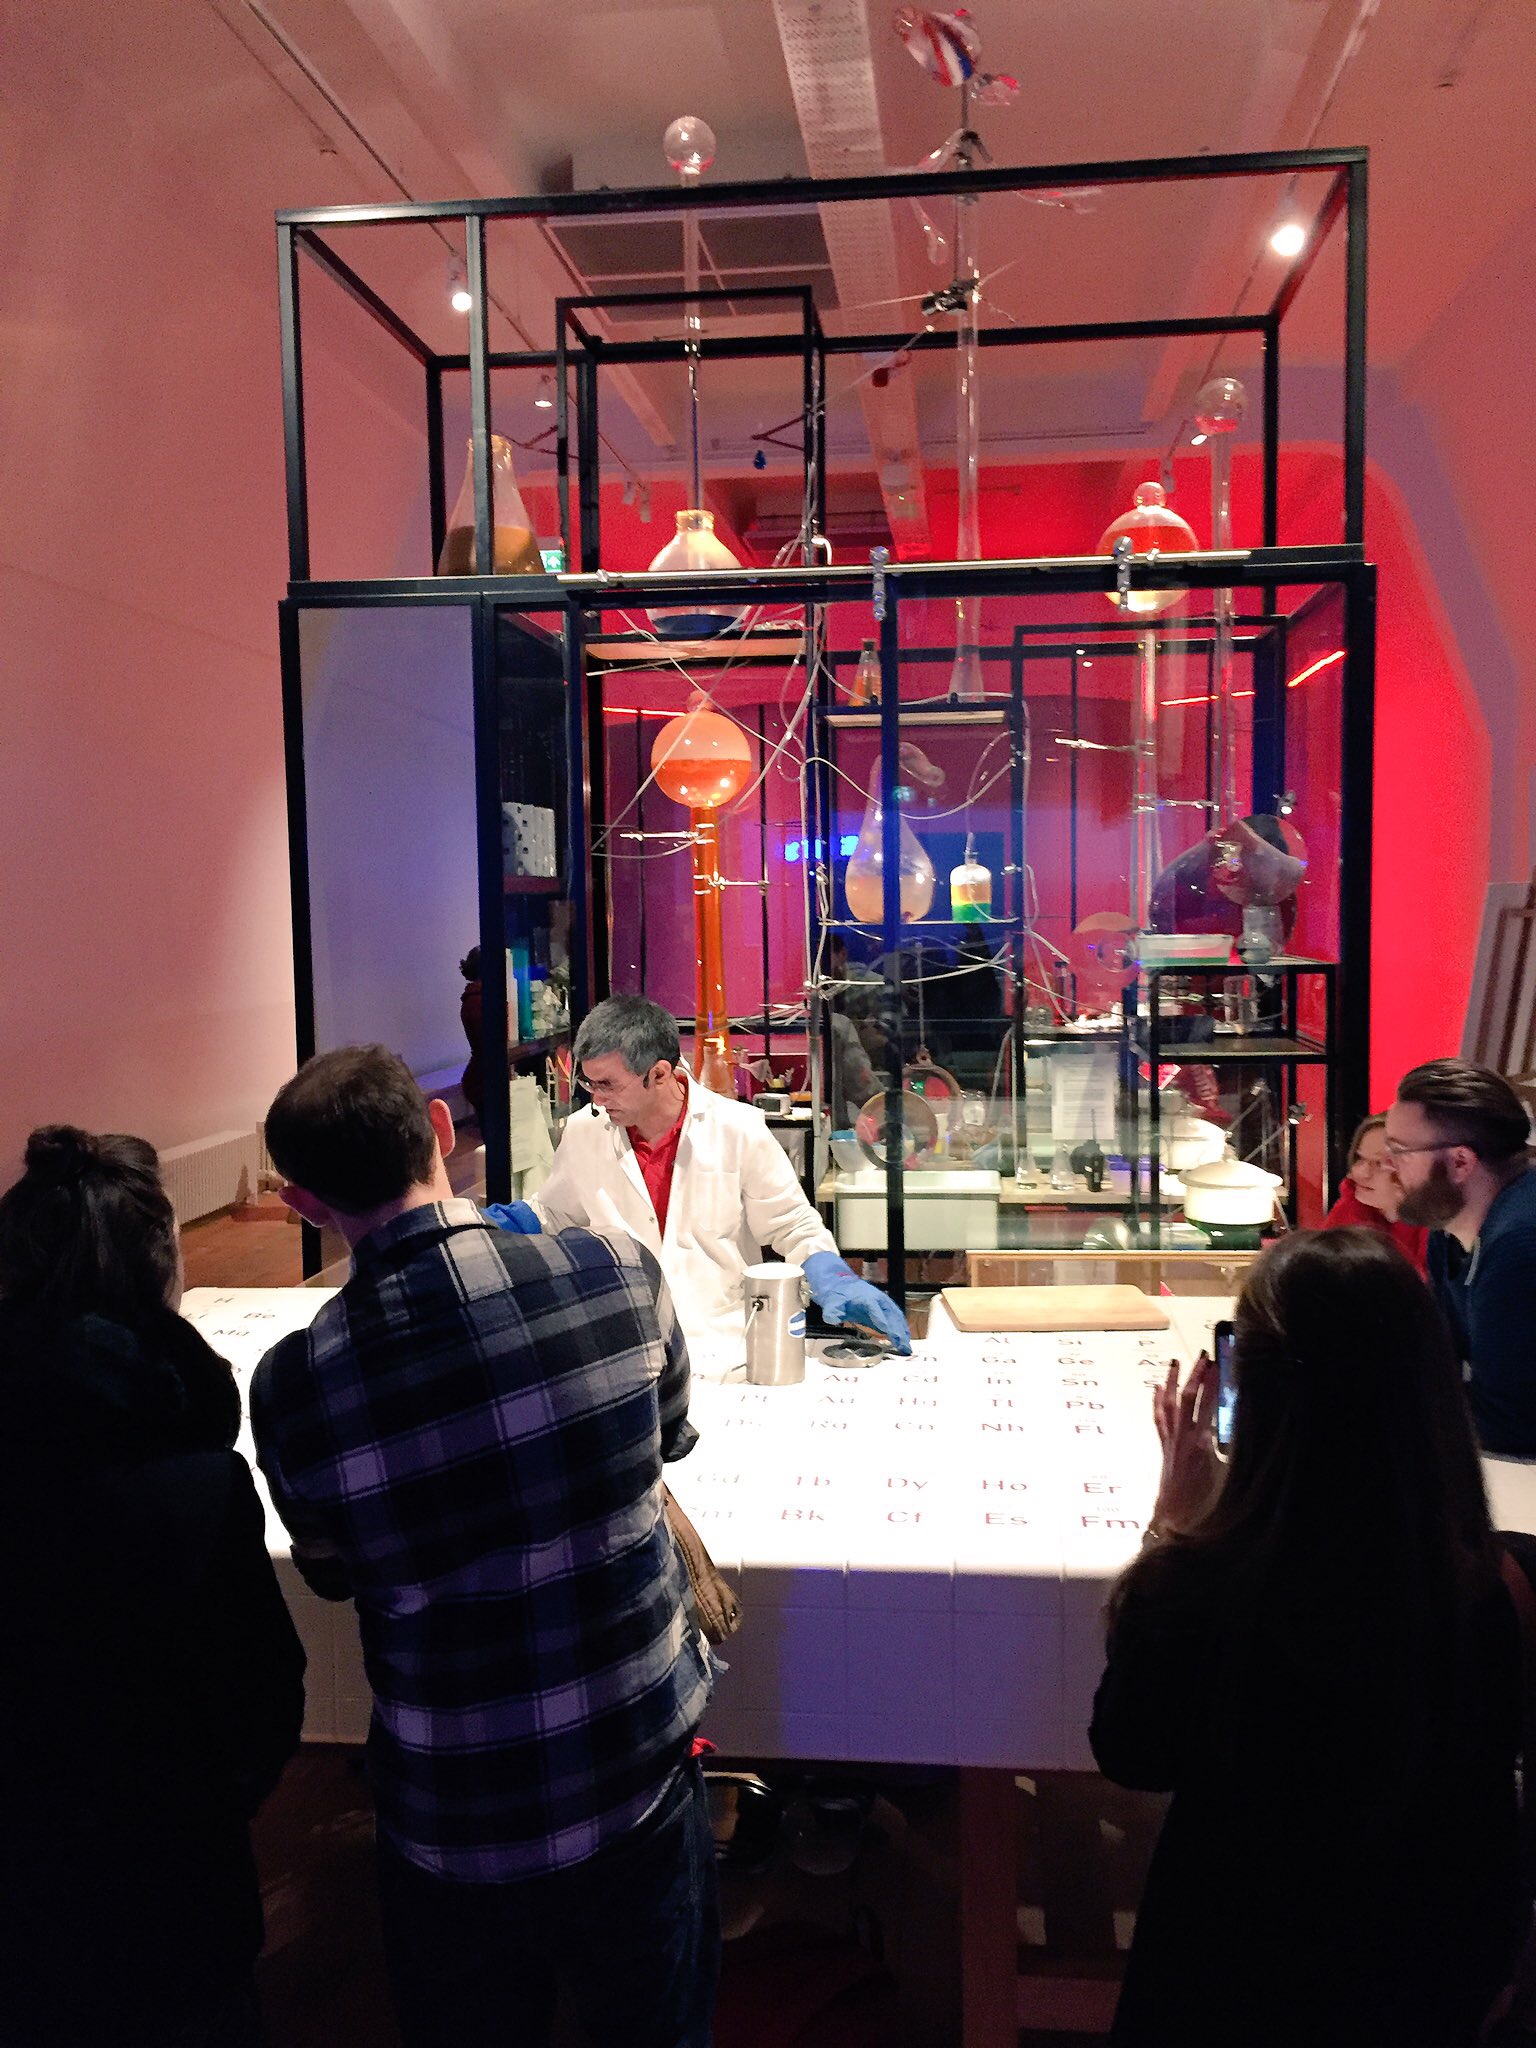 The Wonderlab at the Science Museum